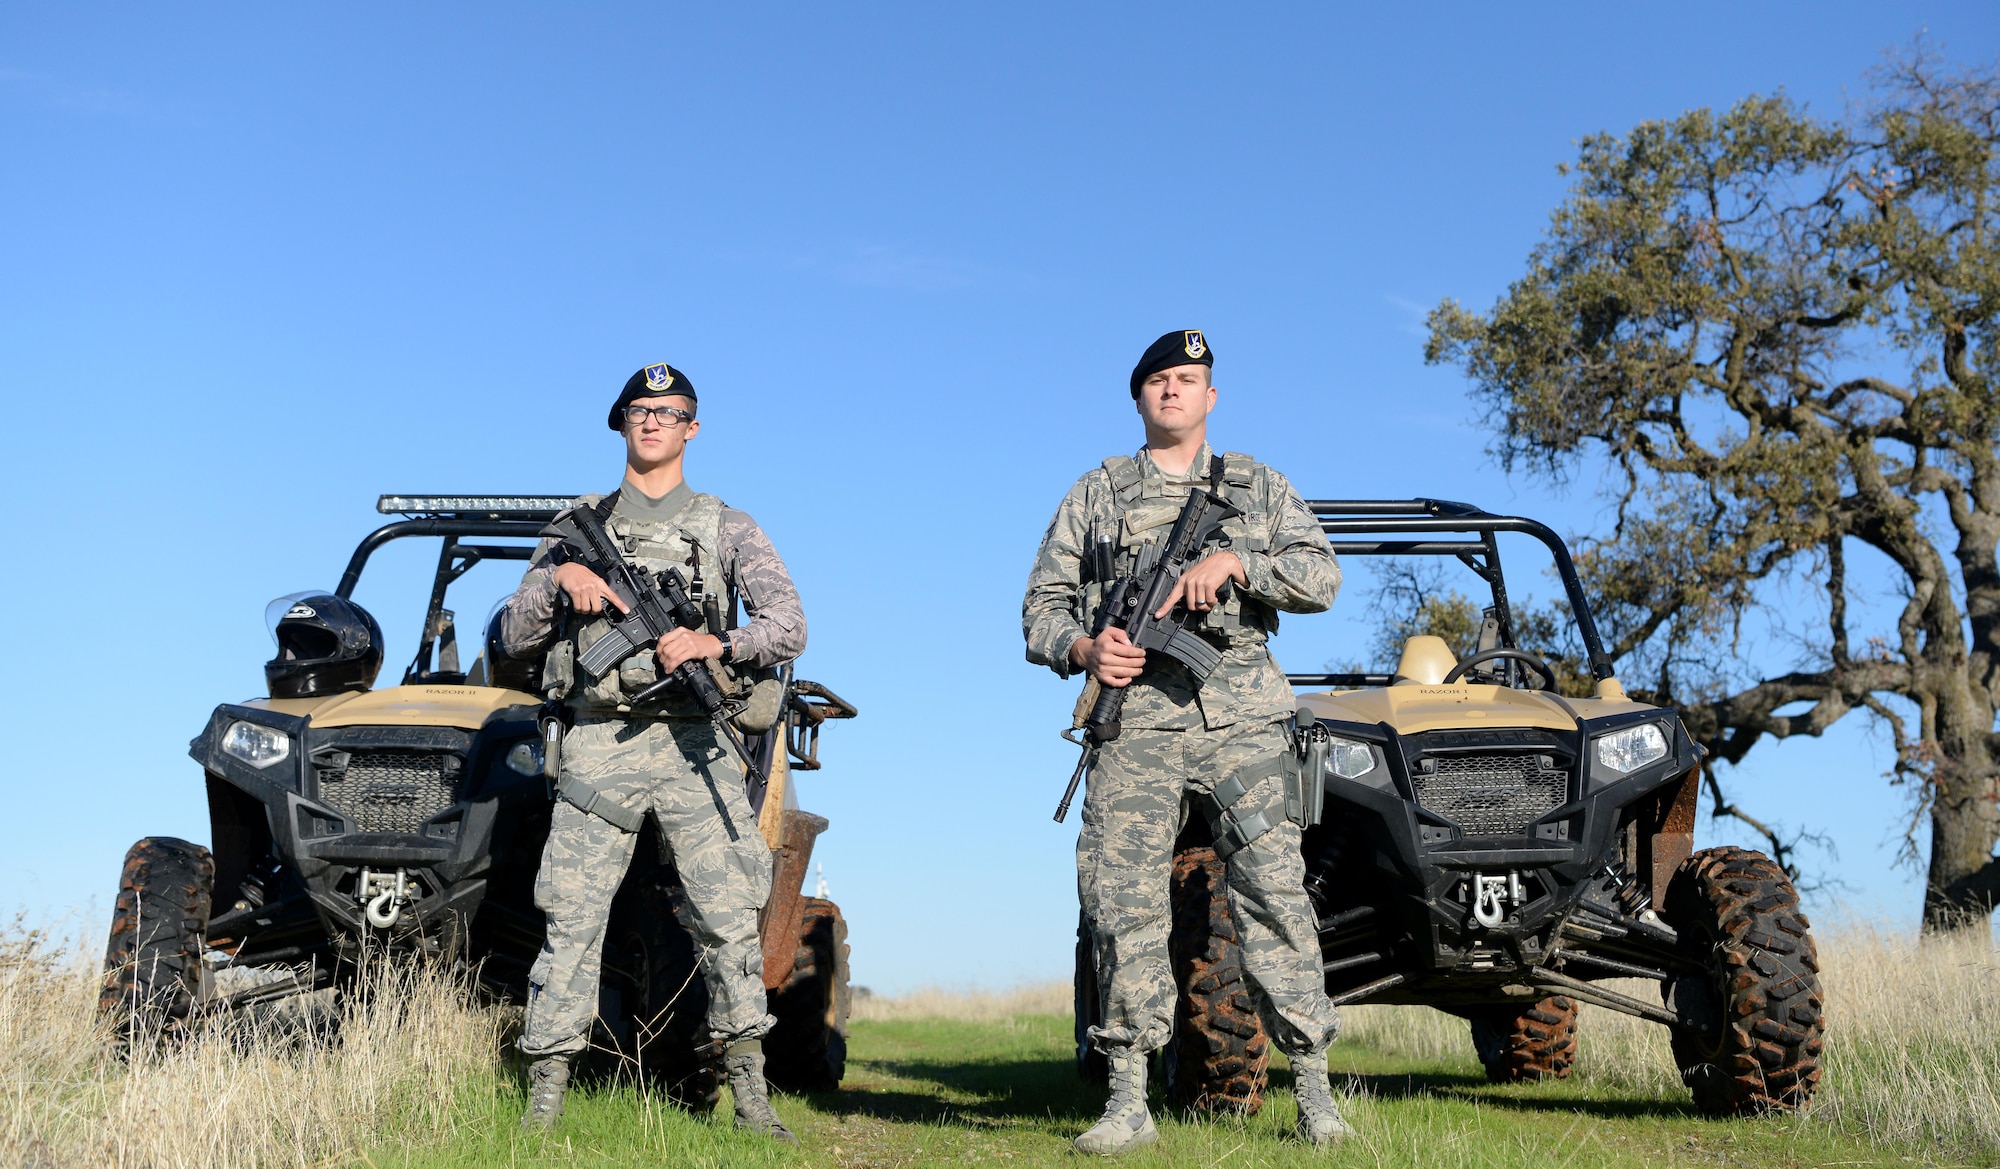 Airman 1st Class Luis Valentin, 9th Security Forces Squadron installation entry controller, and Senior Airman David Gill, 9th SFS base defense operation controller pause during a coyote run Nov. 4, 2016, at Beale Air Force Base, California. Security forces' personnel patrol the perimeter of the base at least once per shift. (U.S. Air Force photo/Airman Tristan D. Viglianco)